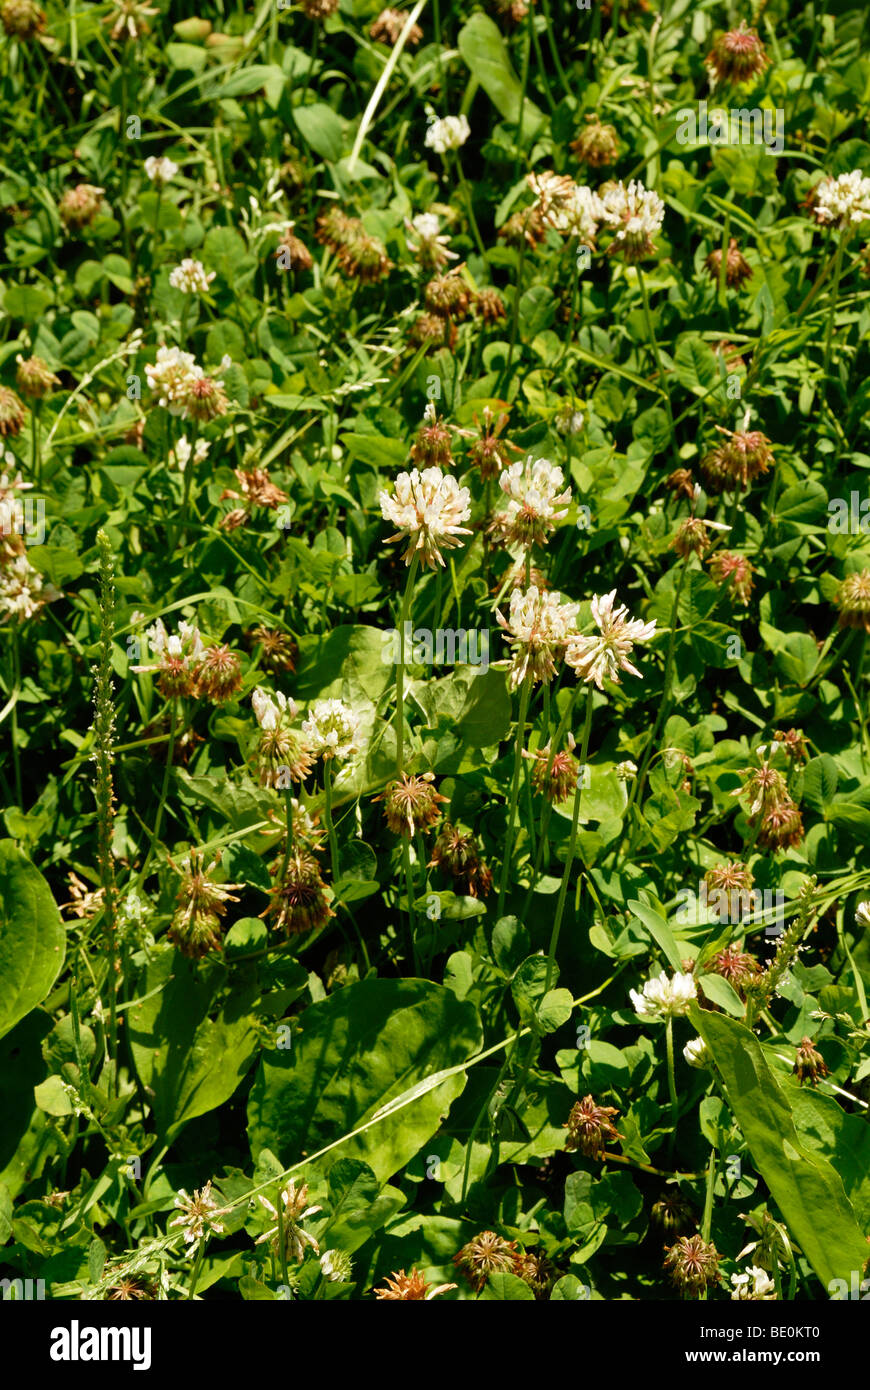 grass clover in the yard lawn Stock Photo